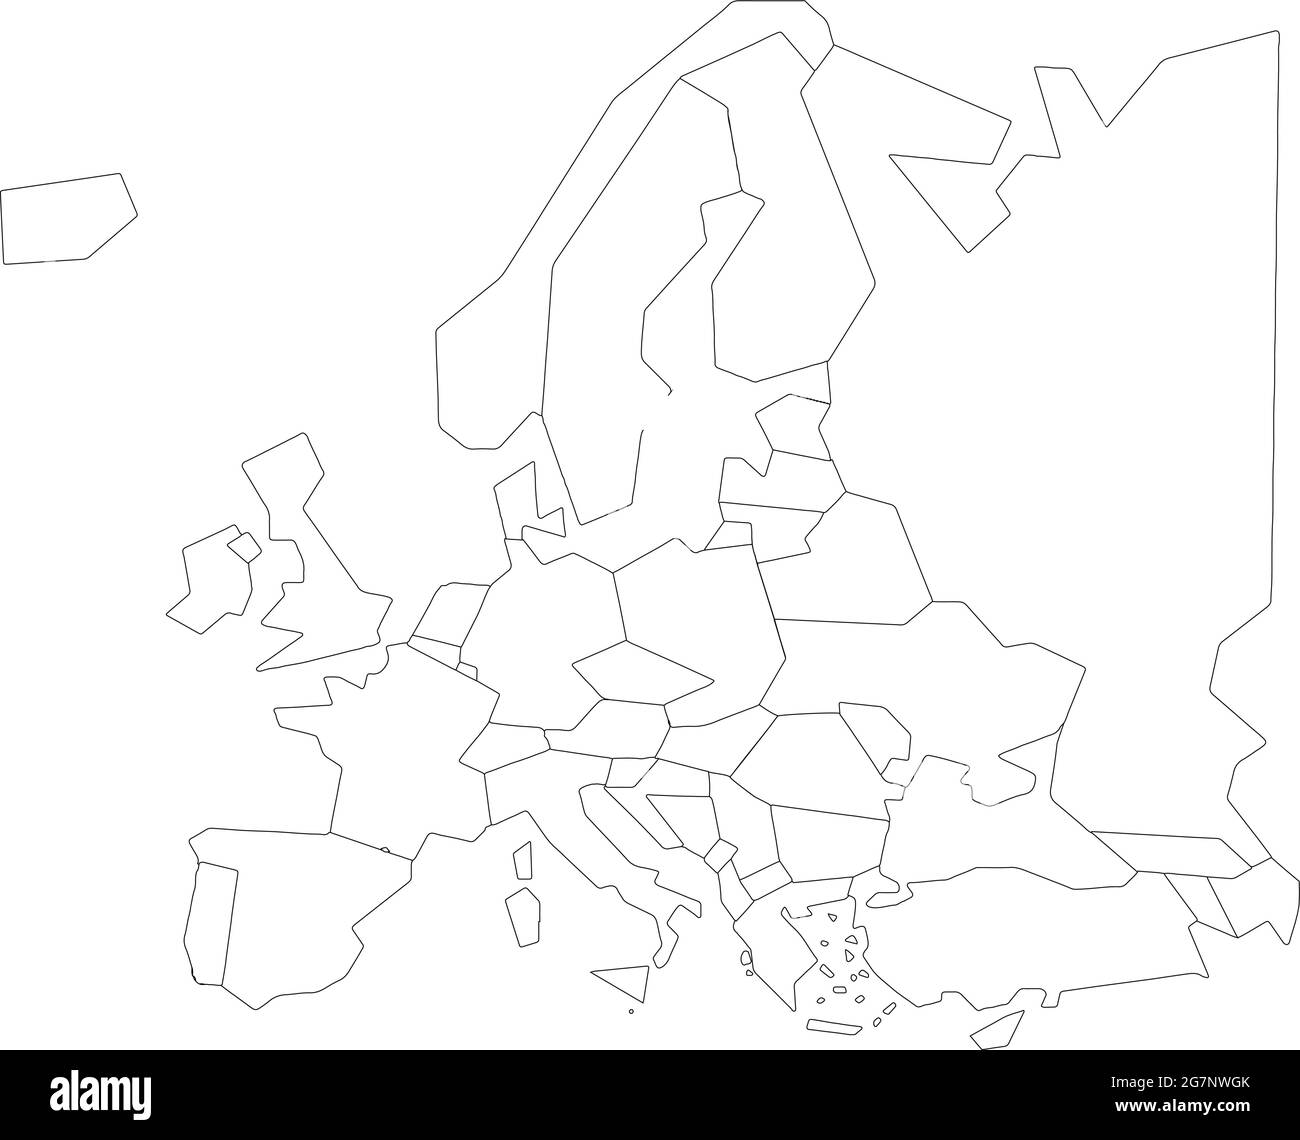 Vector map of Europe to study colorless with outline, black and white Stock Vector